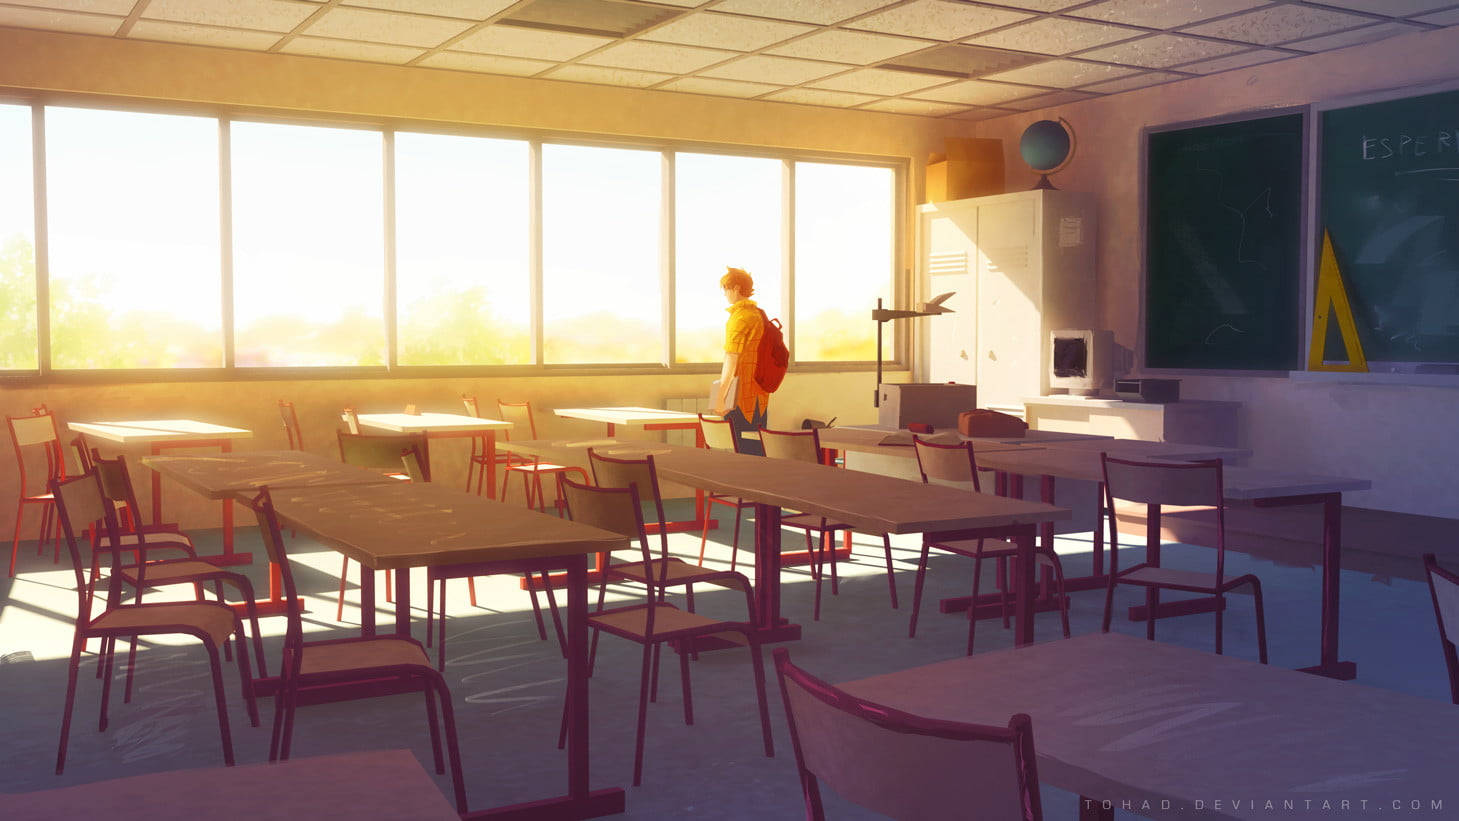 Cartoon Male Student Alone In A Classroom Wallpaper